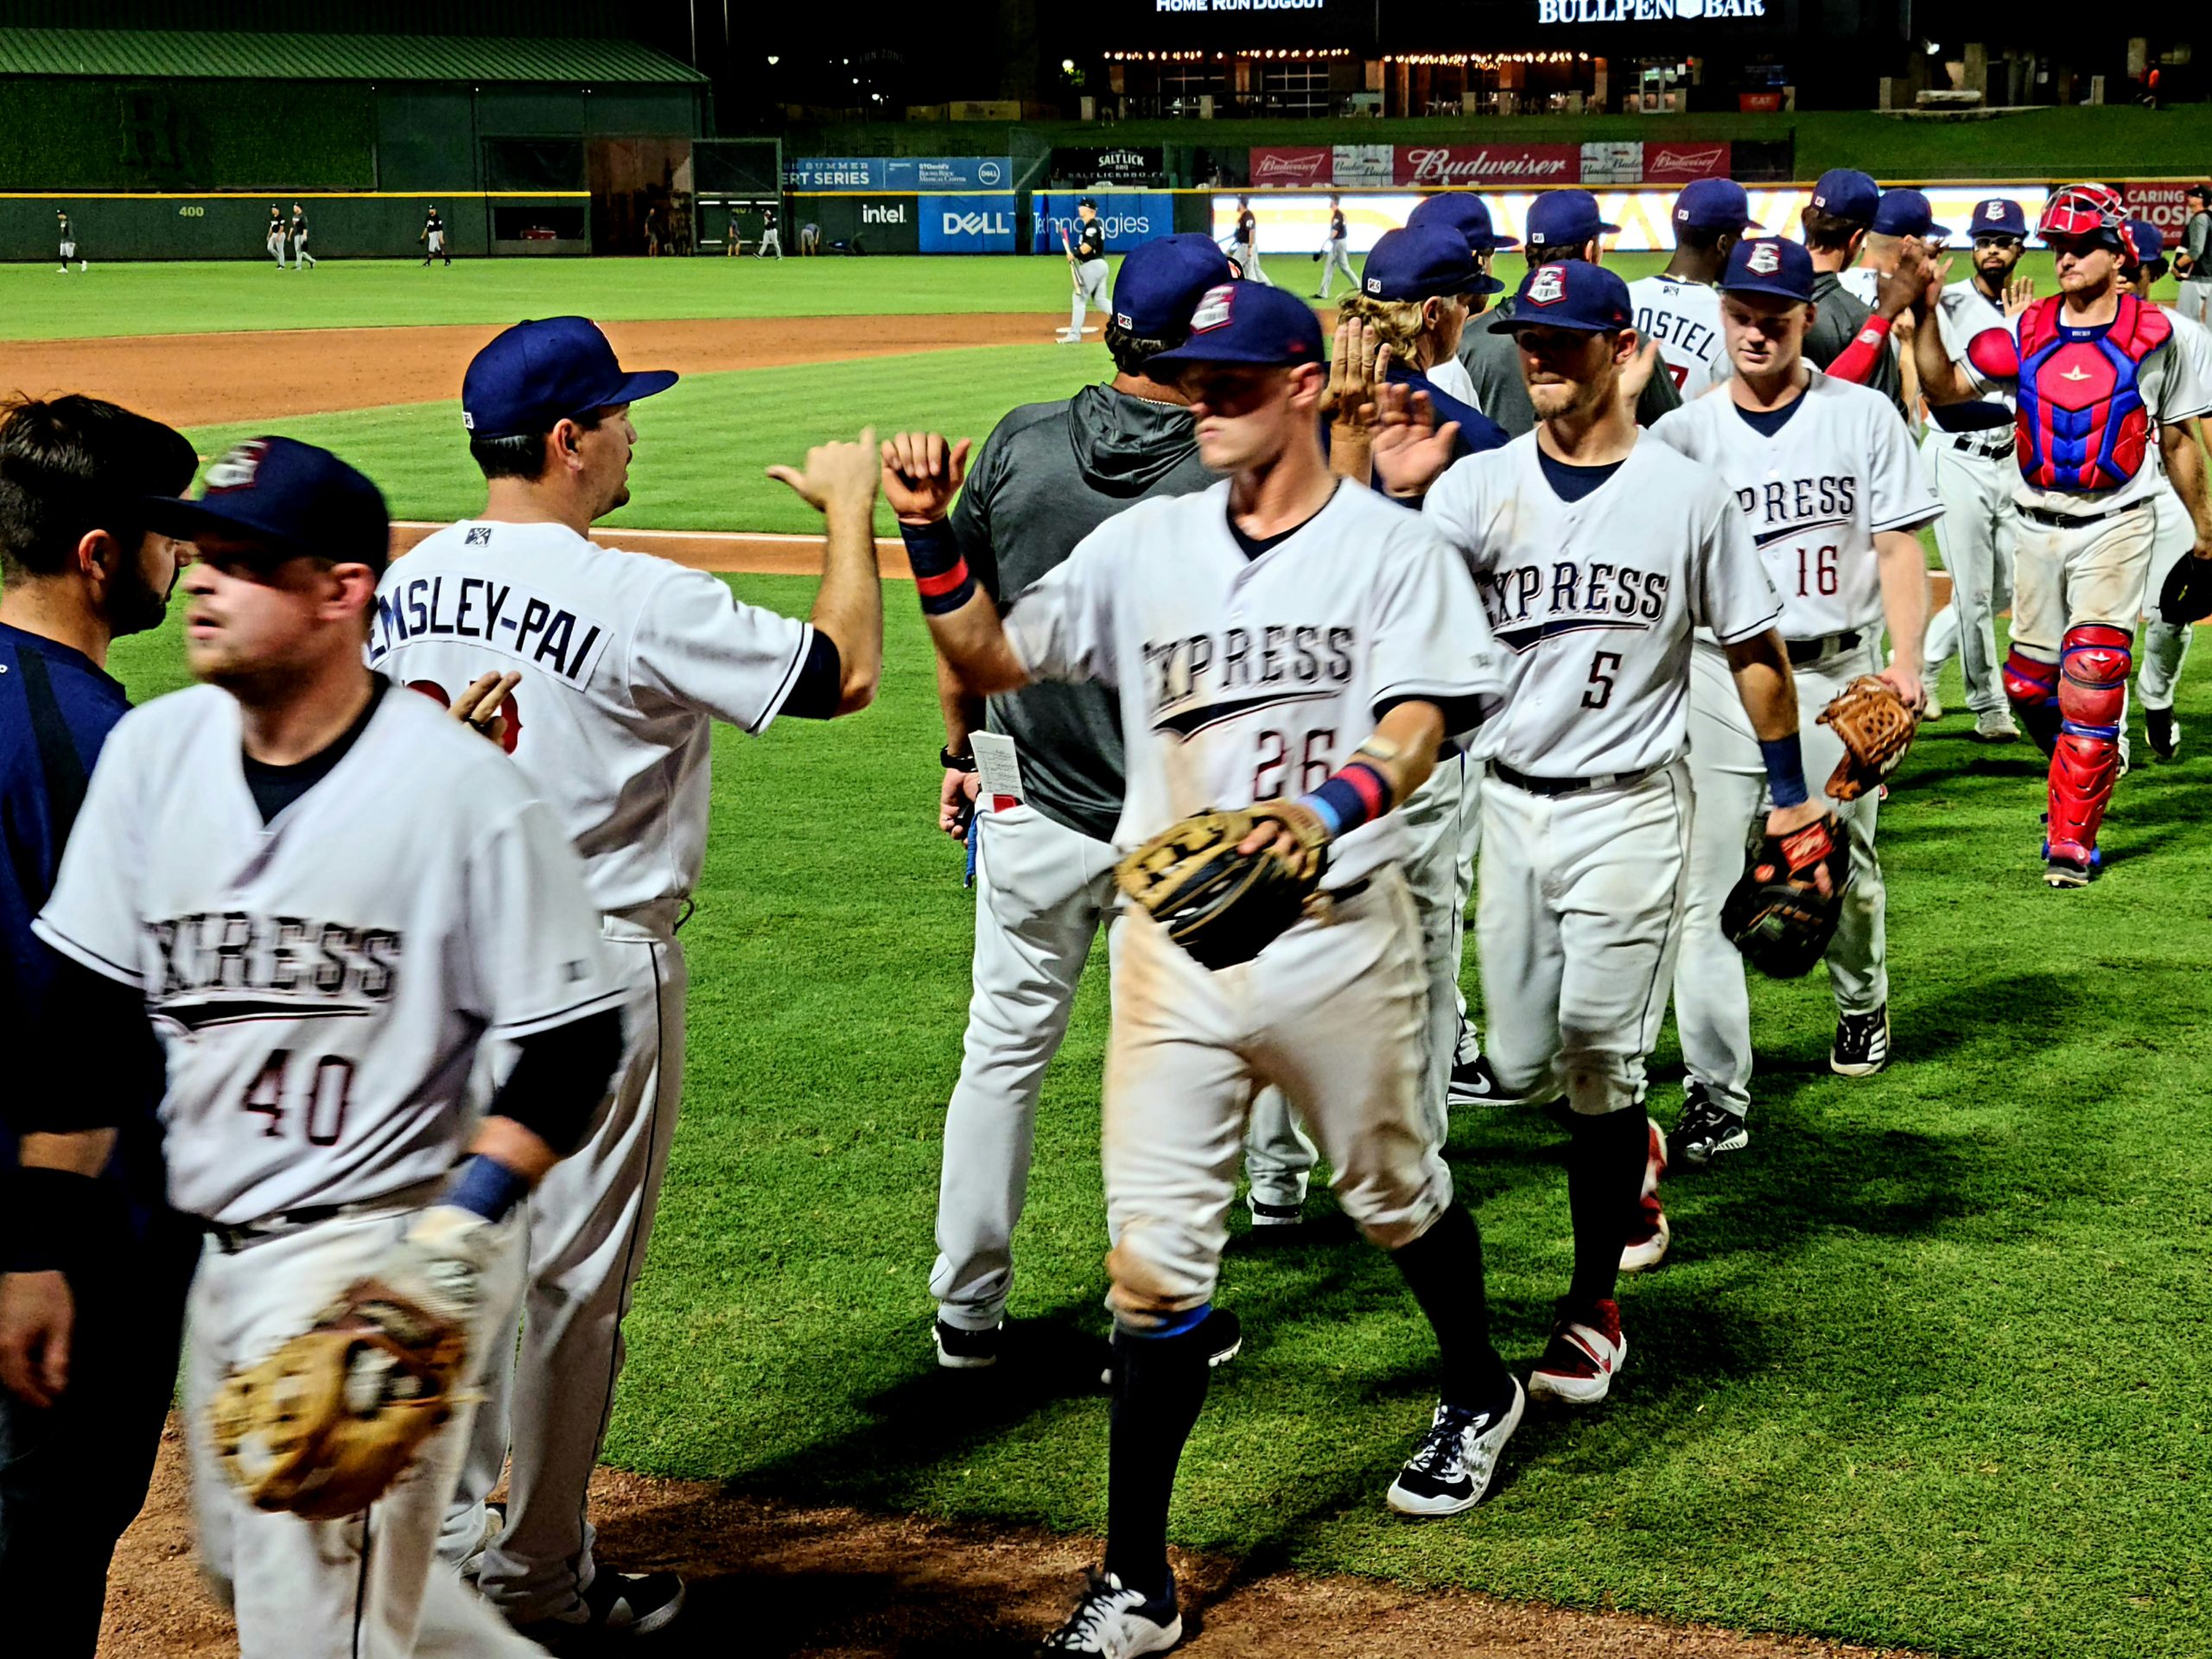 Post game high fives in Round Rock, photo by: Michael Owen